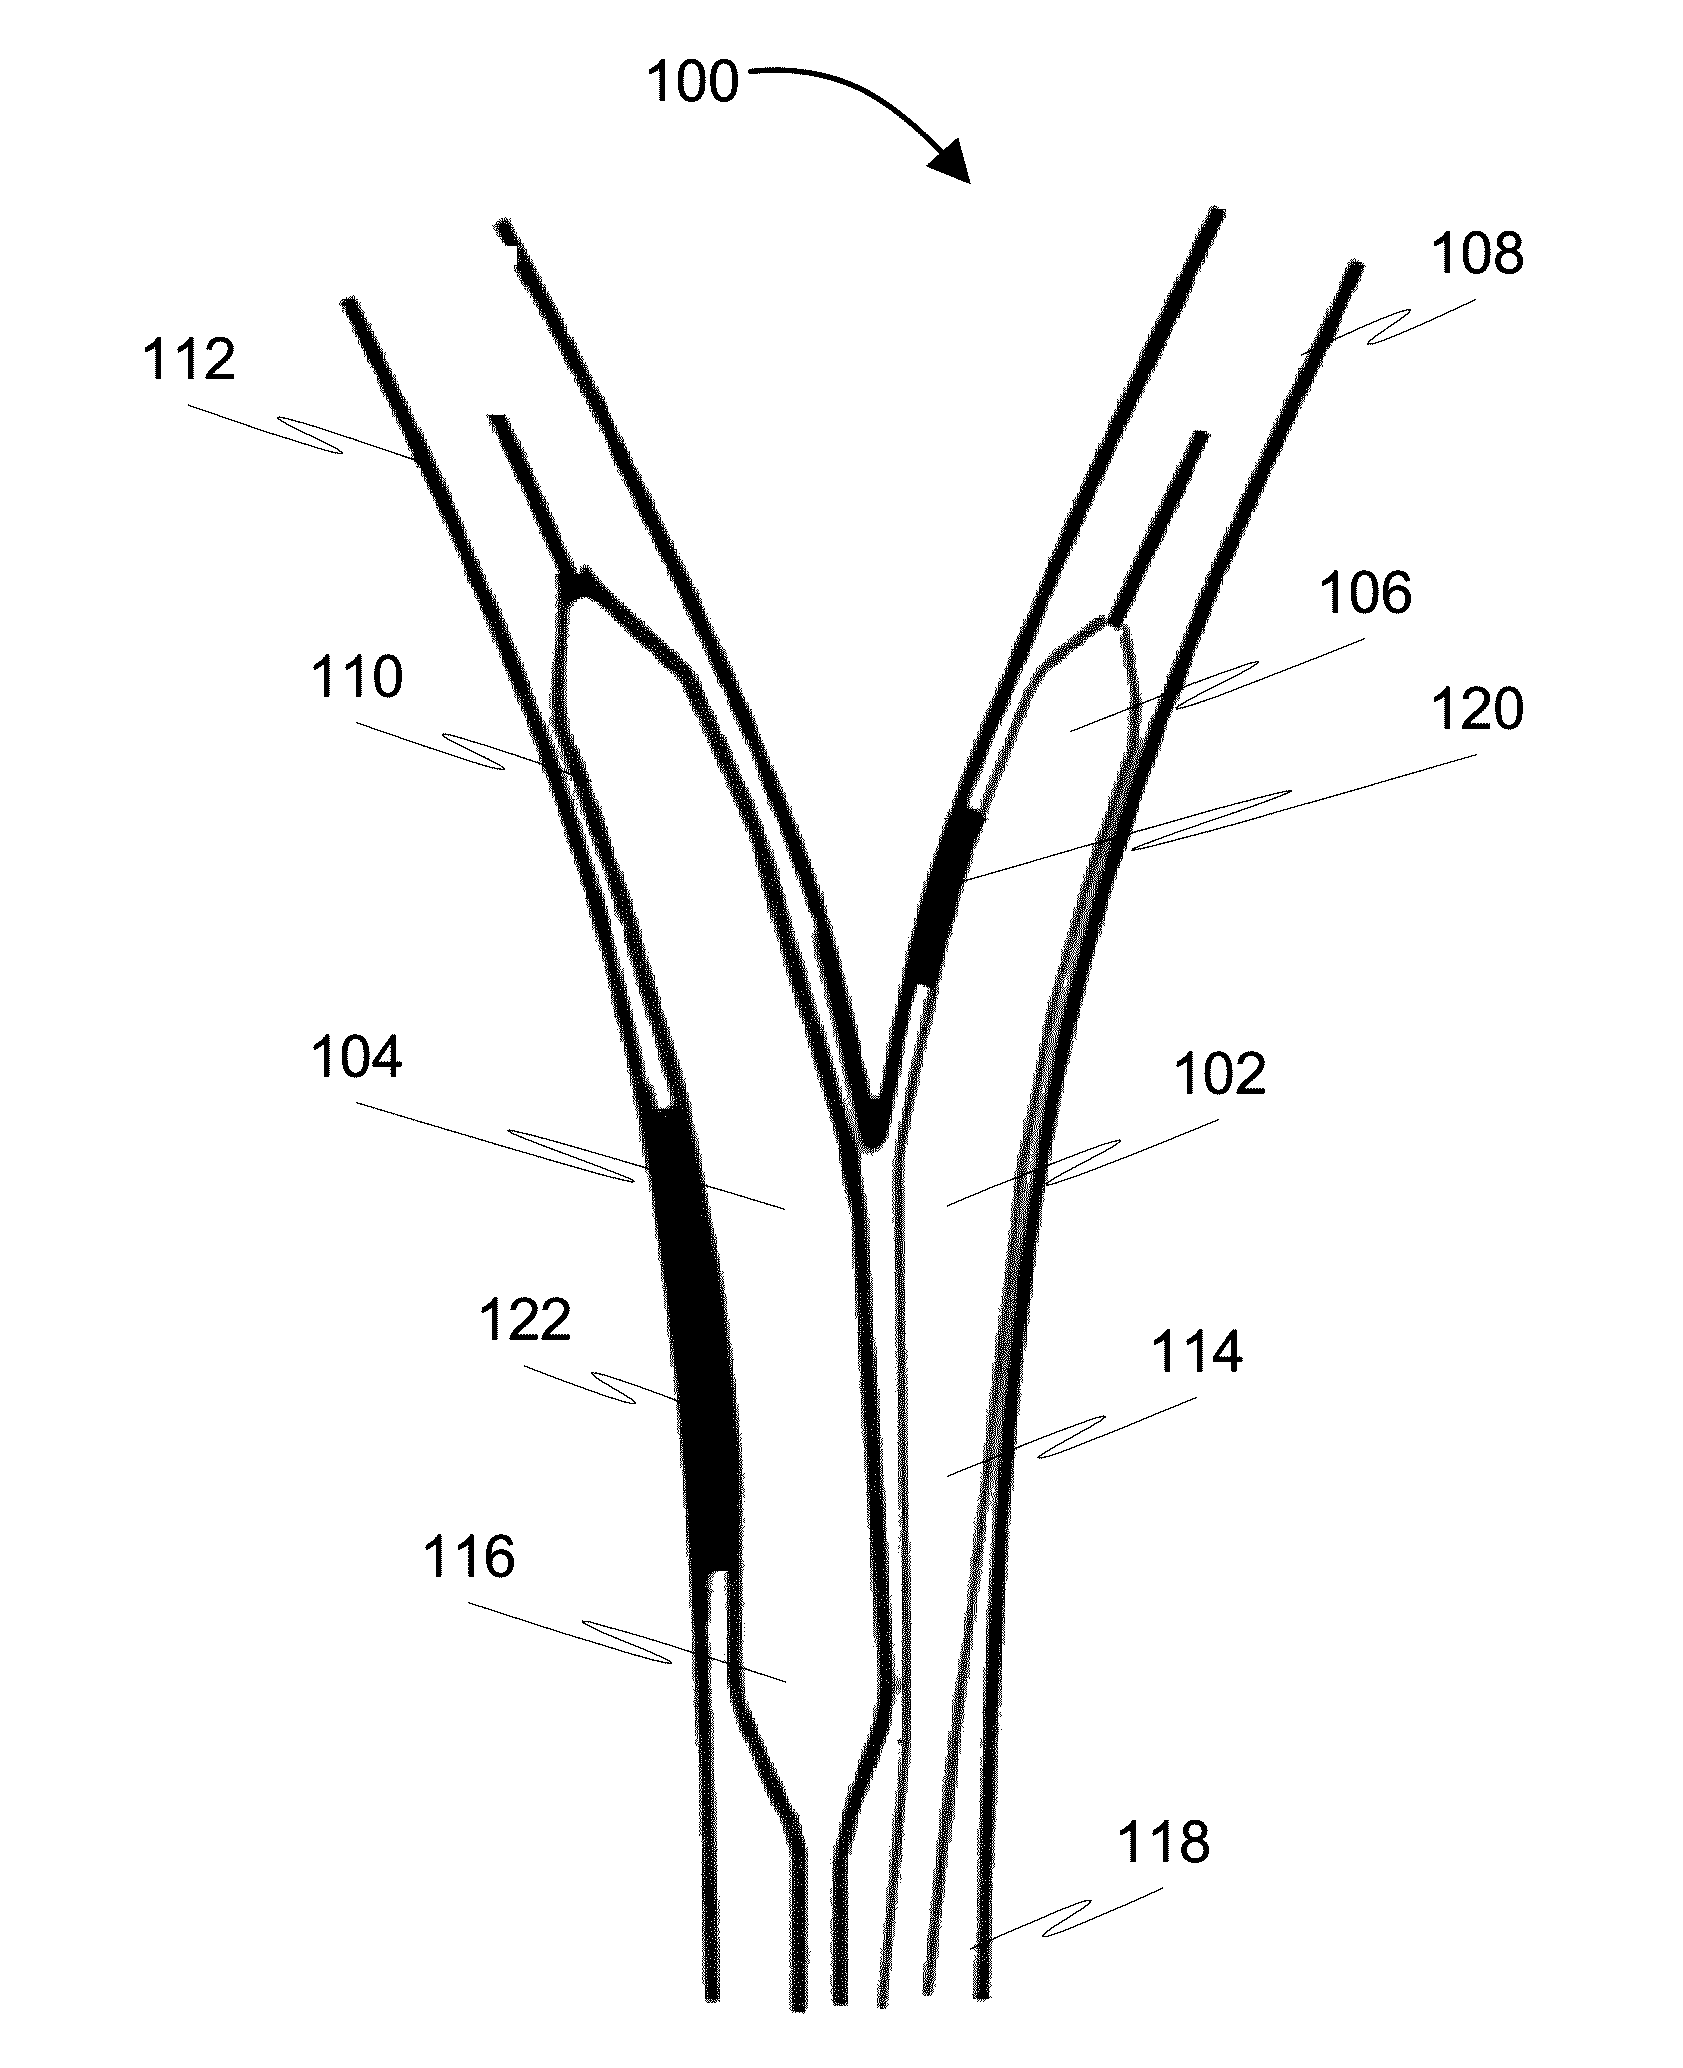 Method and a balloon catheter assembly for treating bifurcation lesions